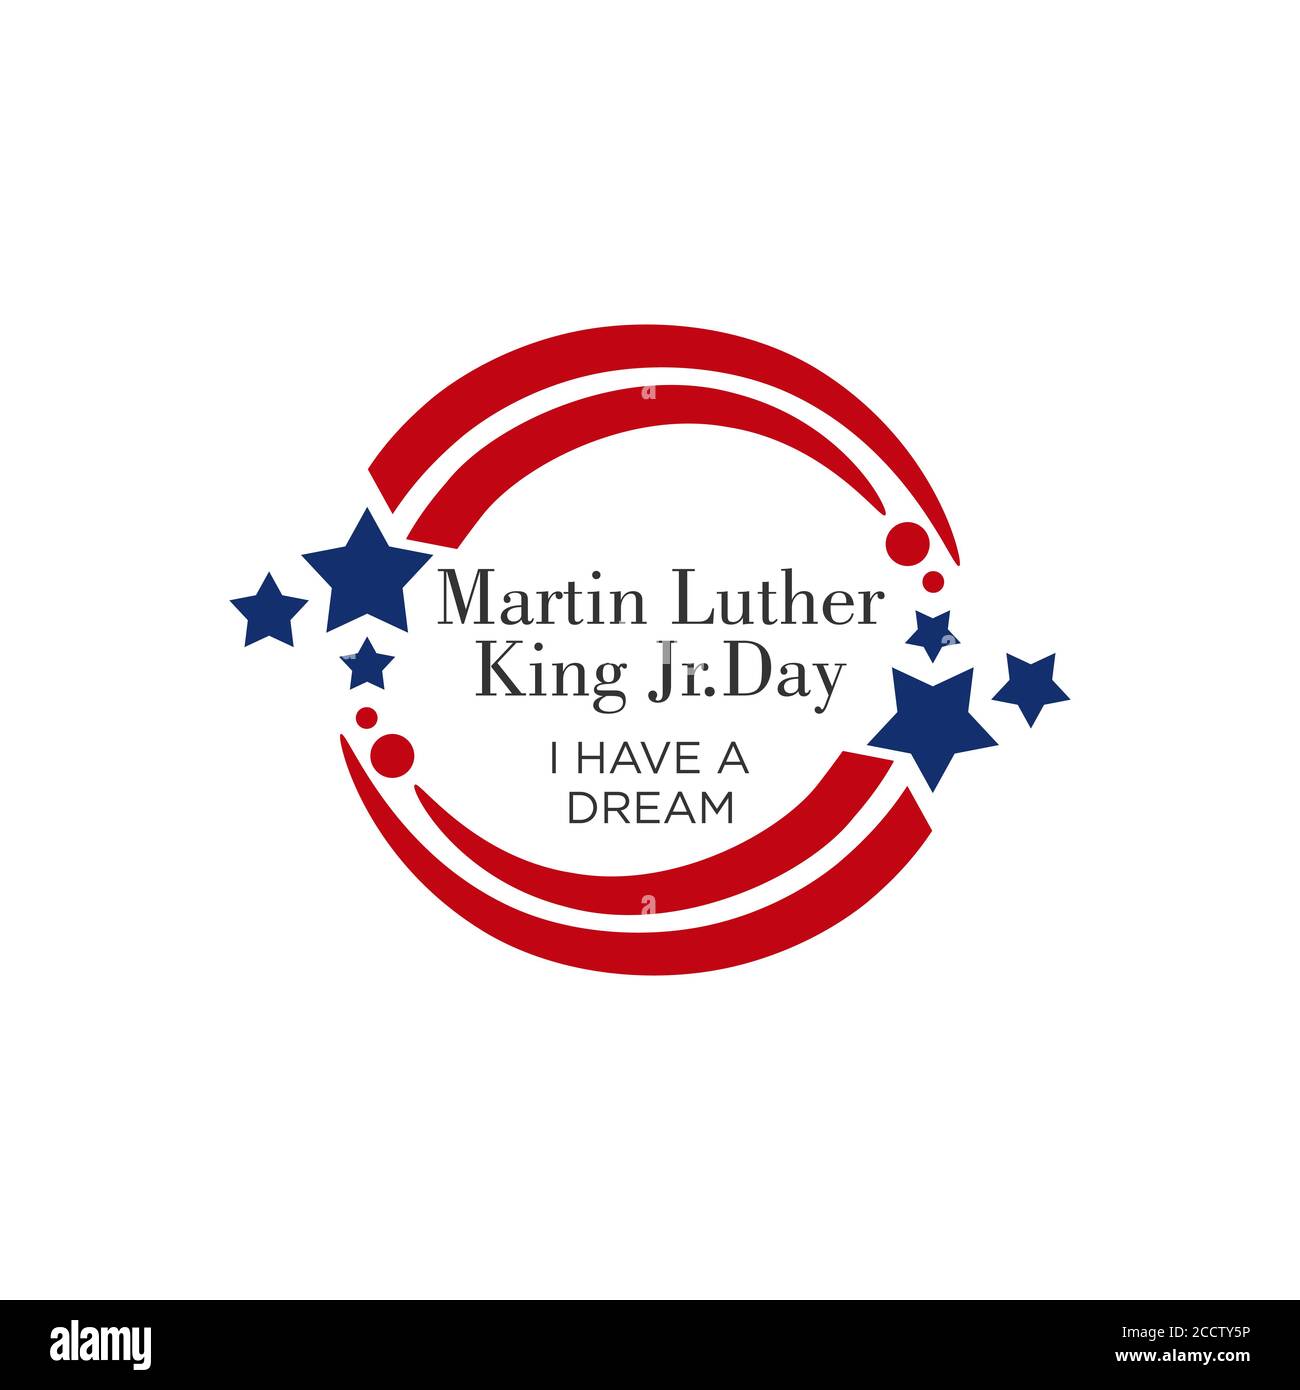 martin luther king giorno banner layout disegno, illustrazione vettoriale Illustrazione Vettoriale